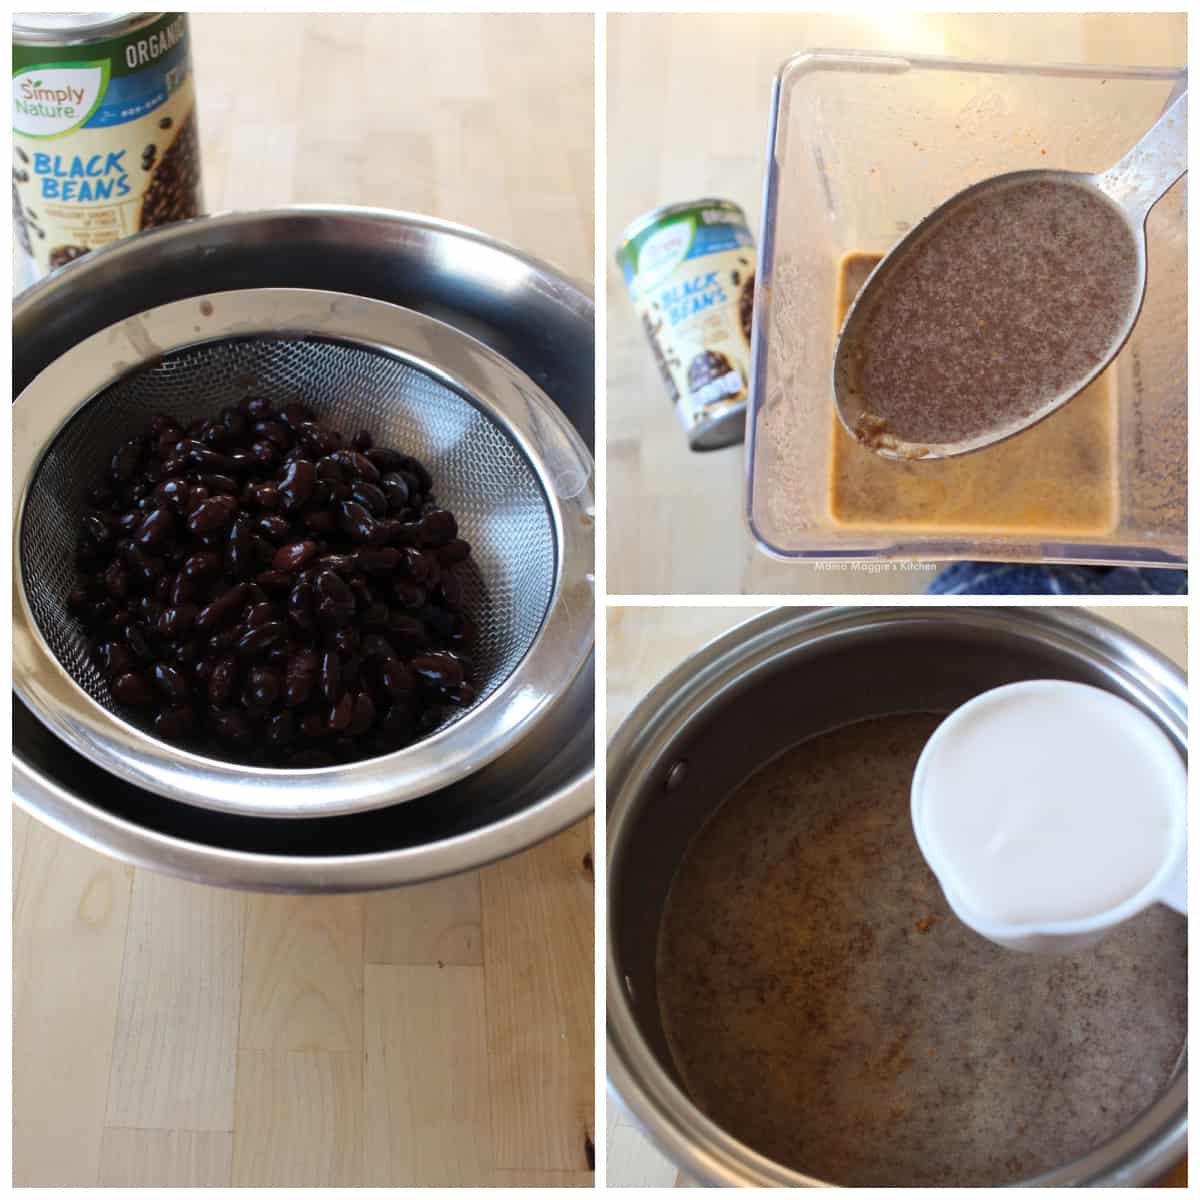 A collage showing how to make the Crema de Frijol Negro